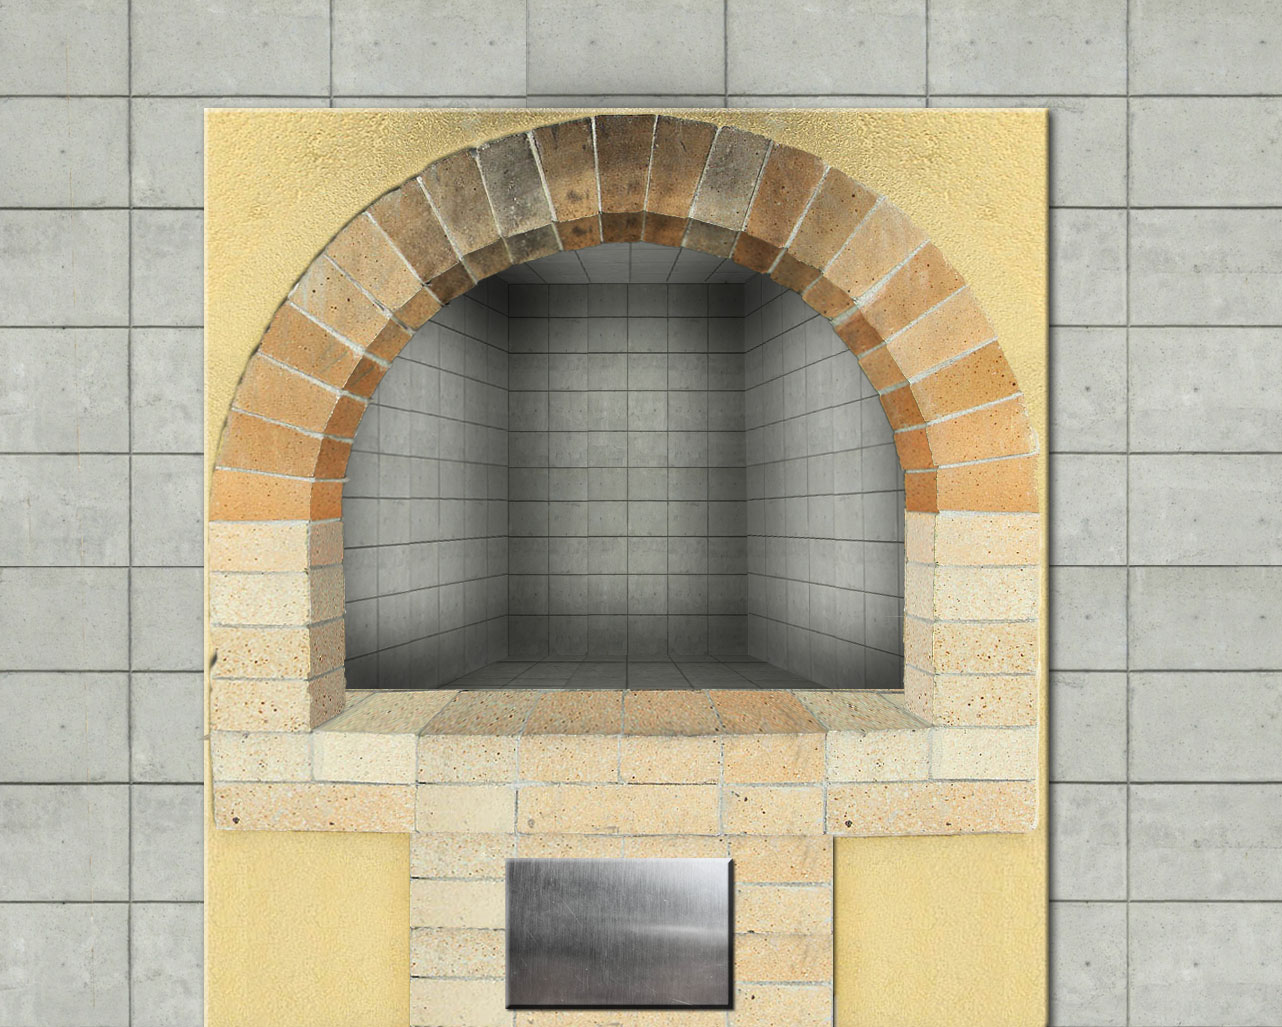 wall-oven-front-shot-02.jpg